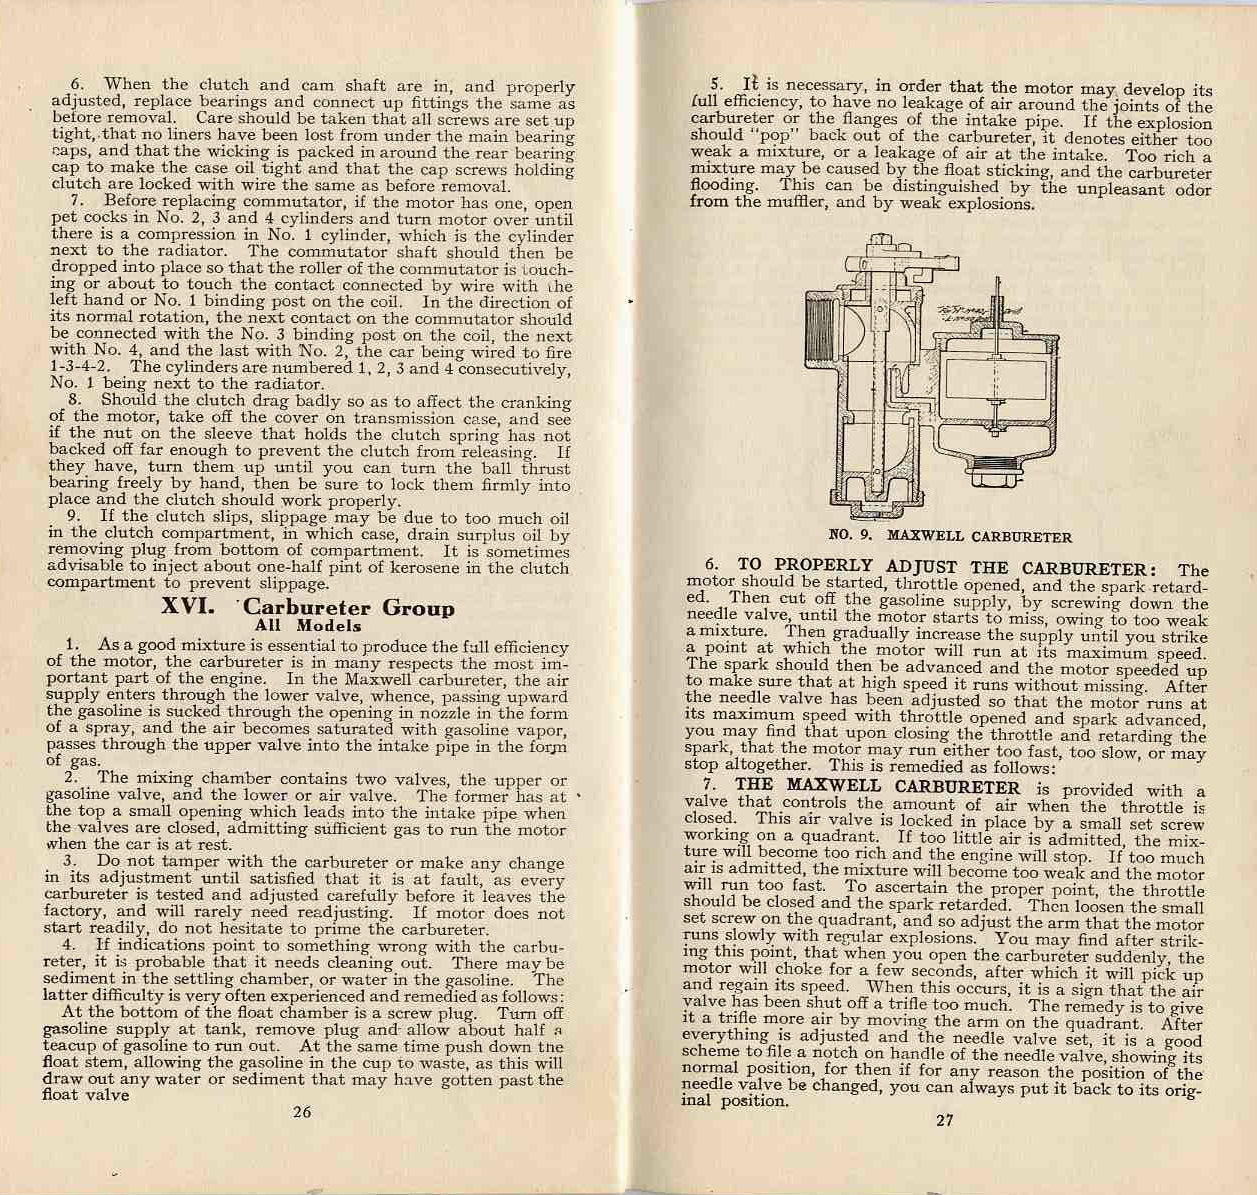 1909_Maxwell_Instructions-26-27